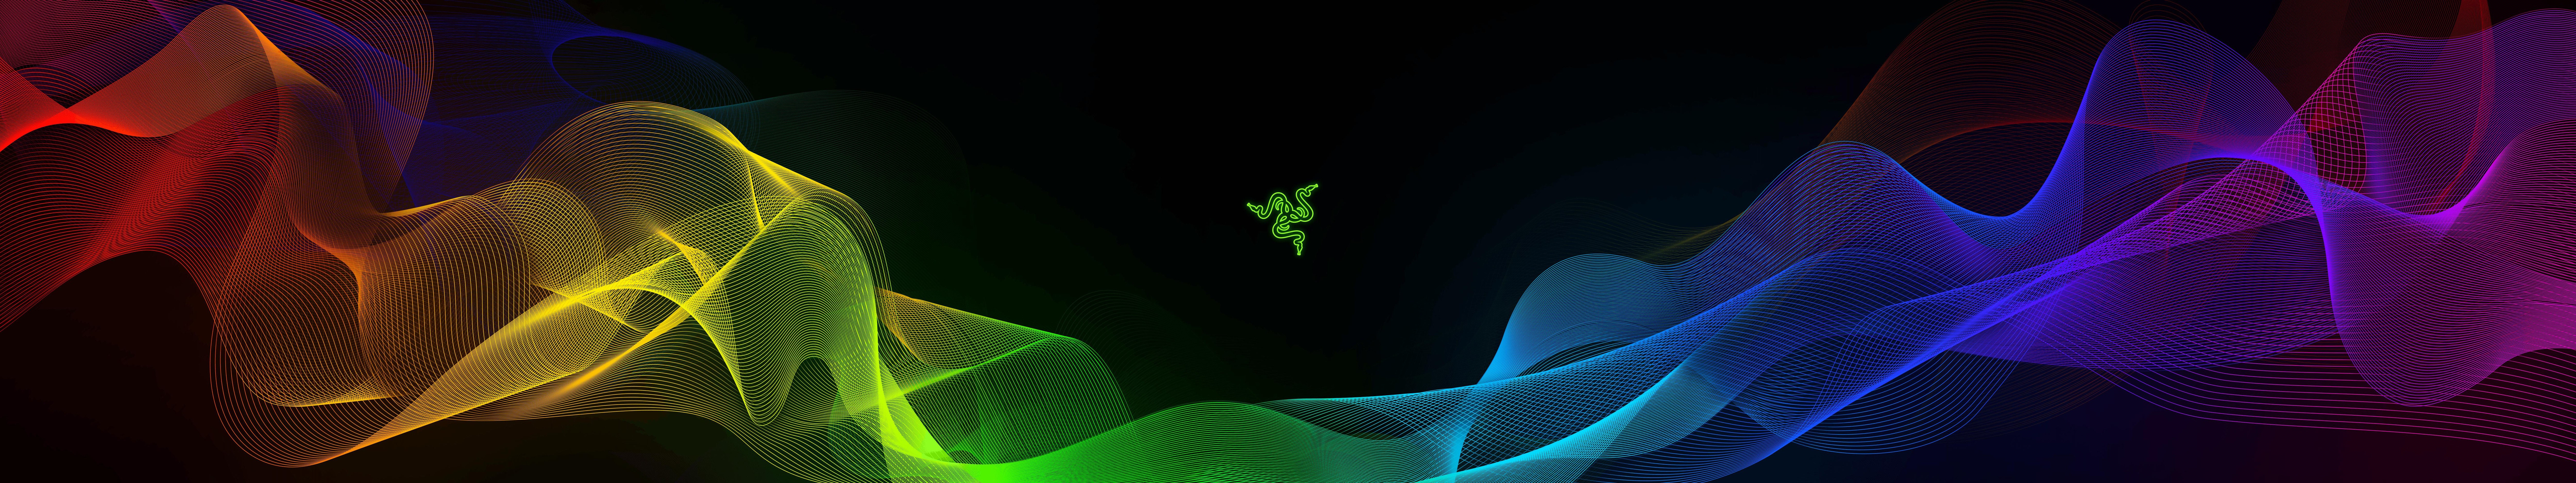 11520 x 2160 · png - Razer Chroma Wallpapers - Wallpaper Cave